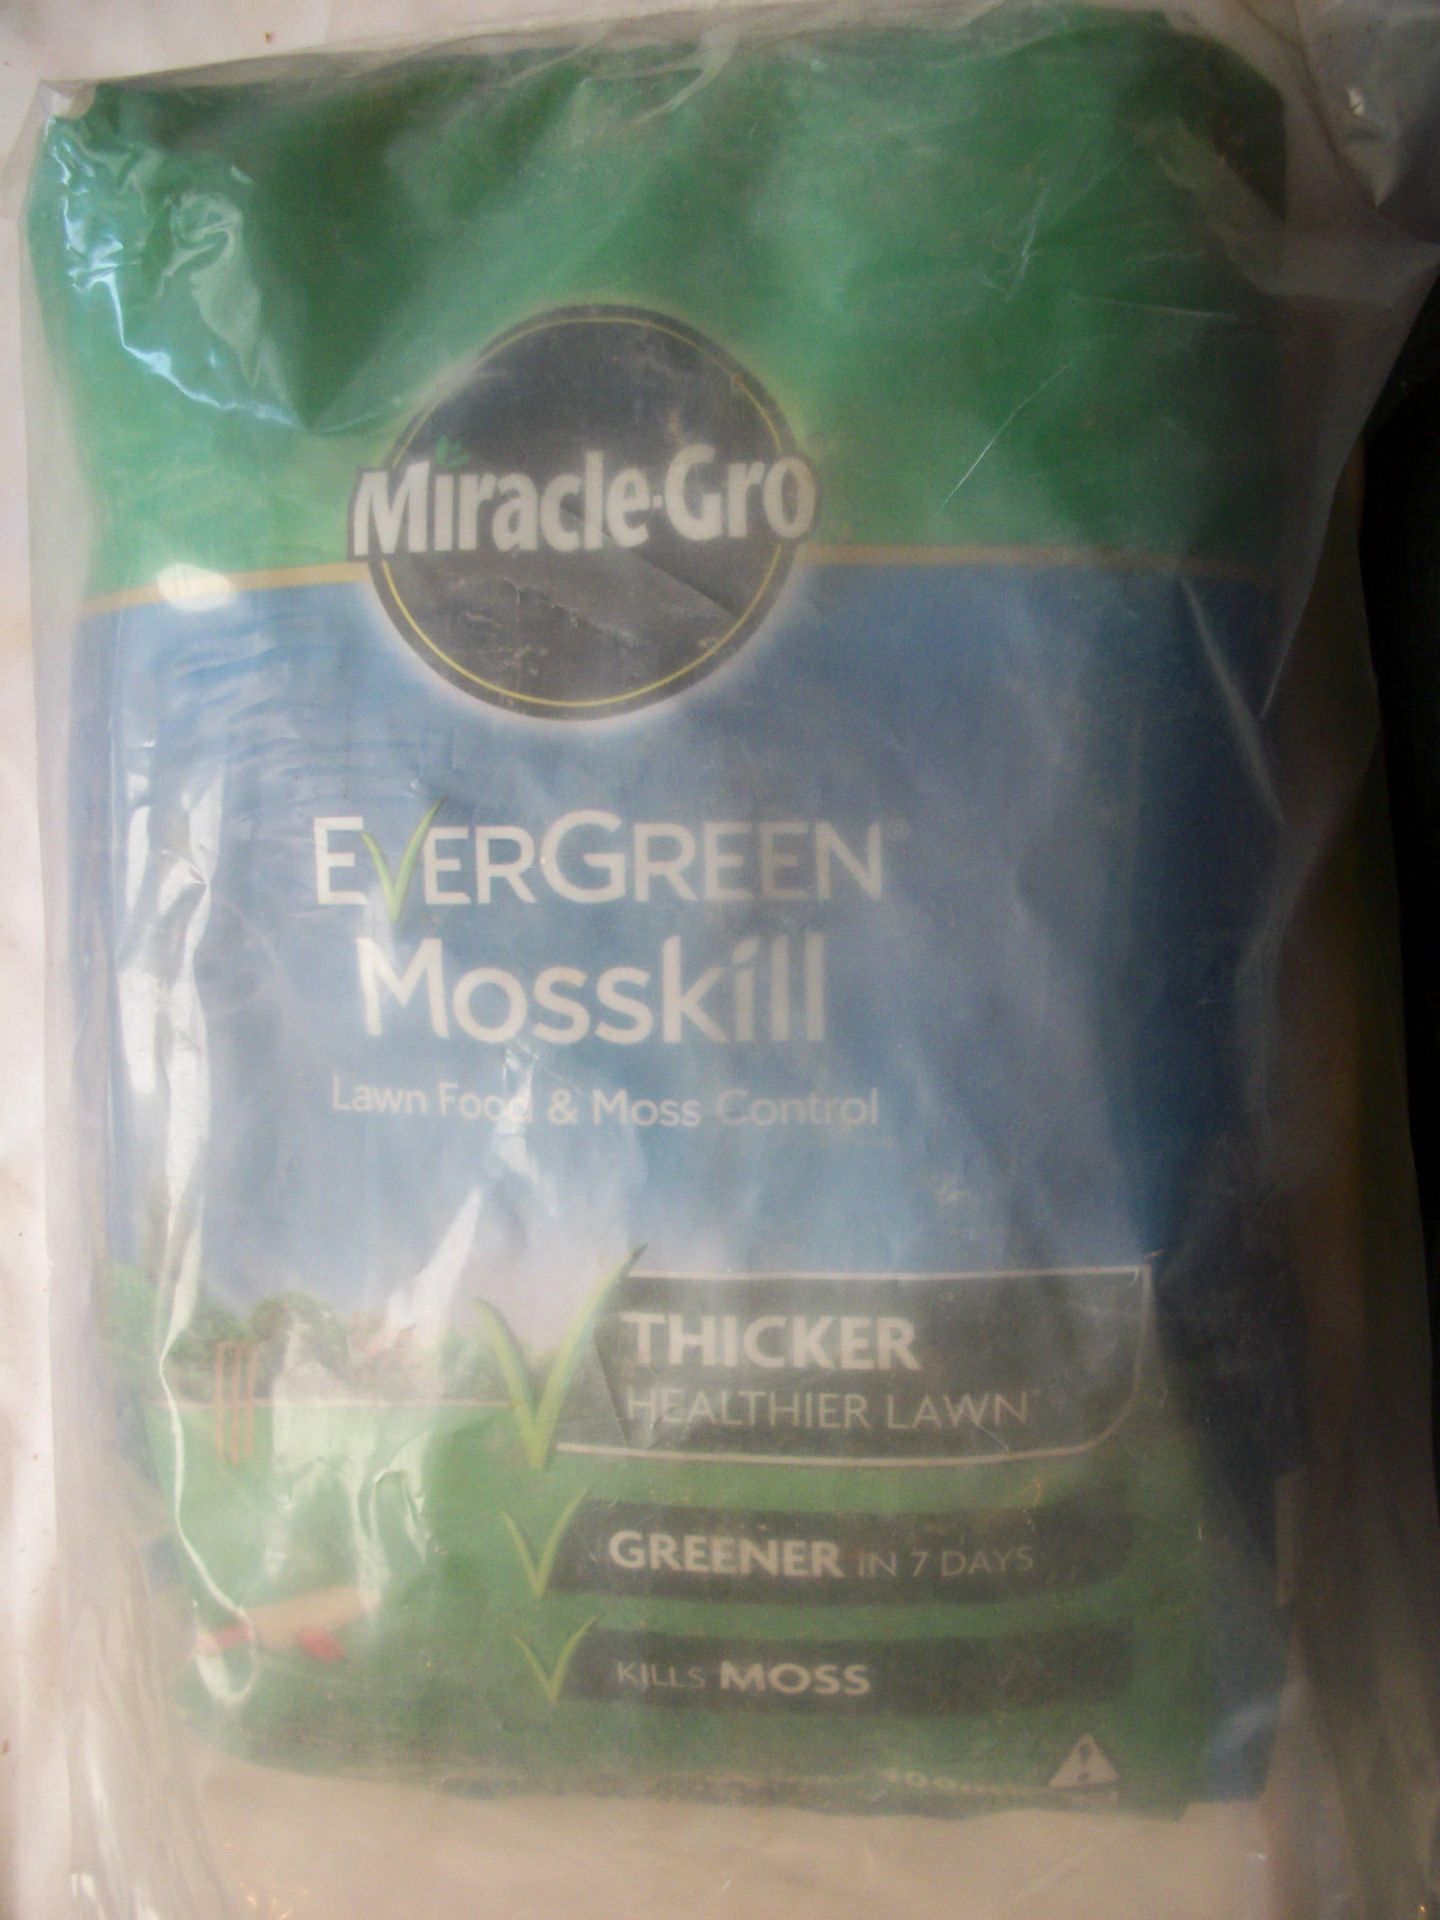 Miracle-Gro Evergreen Mosskill covers approx 400m2